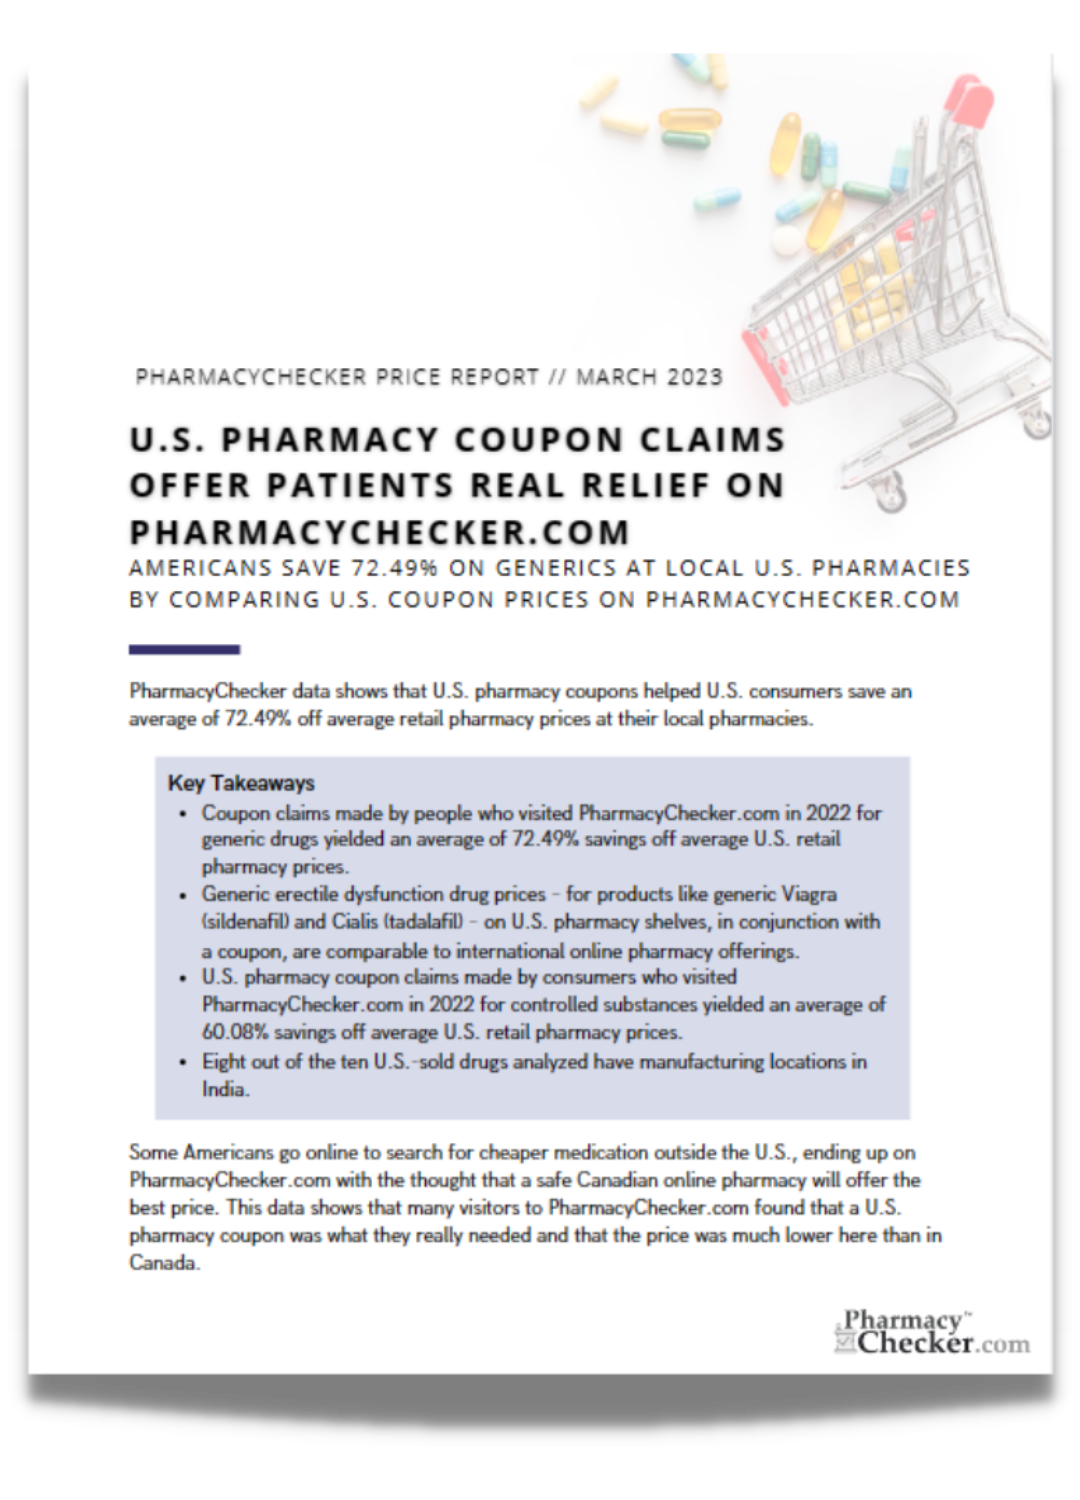 Americans Save 72.49% on Generics at Local U.S. Pharmacies By Comparing U.S. Coupon Prices on PharmacyChecker.com 